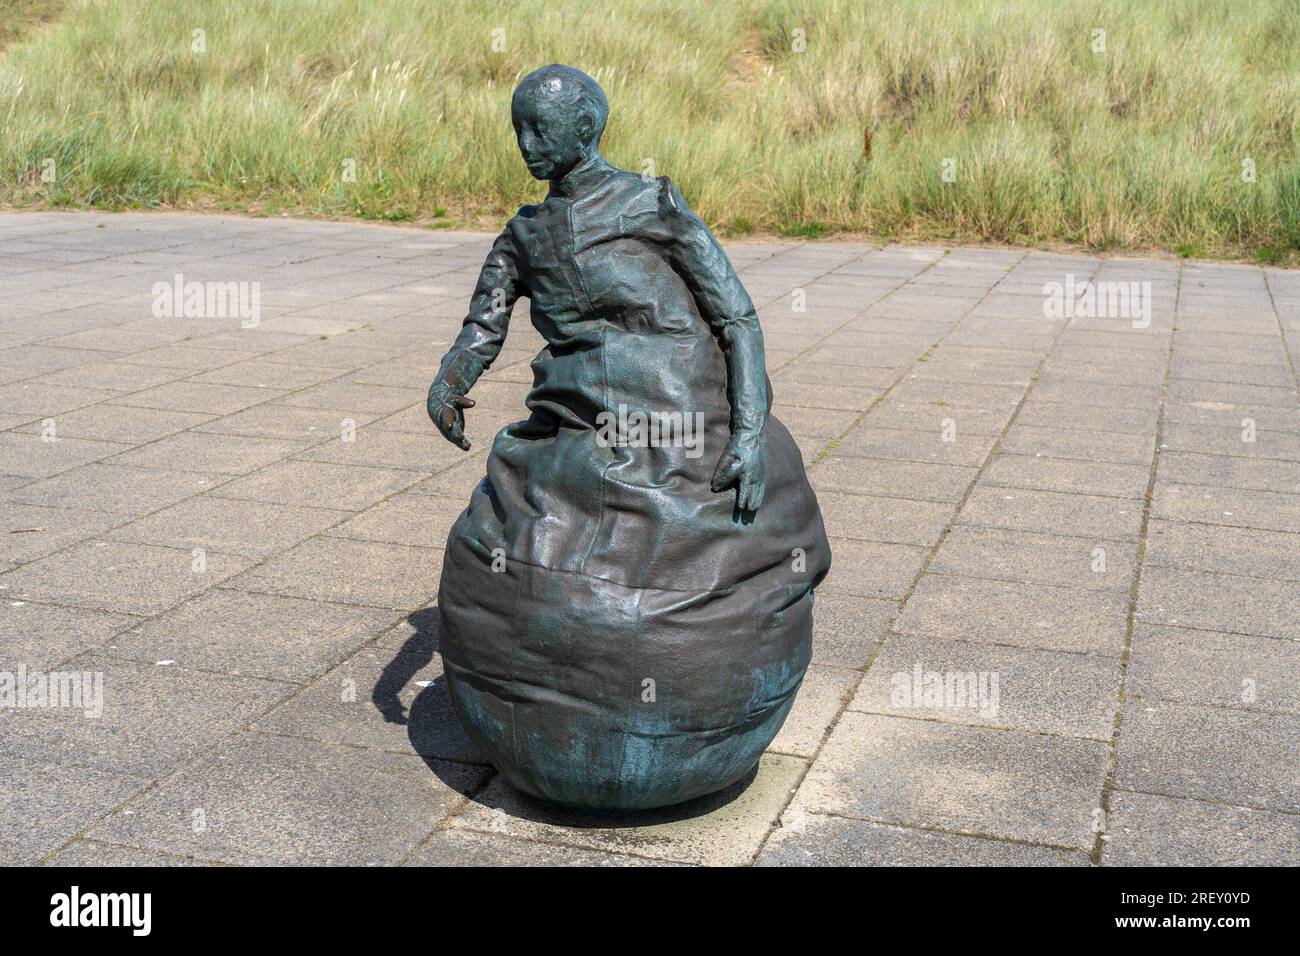 'Conversation Piece' sculptures by Juan Muñoz, locally known as The Weebles, at Littlehaven, South Shields, UK. Stock Photo